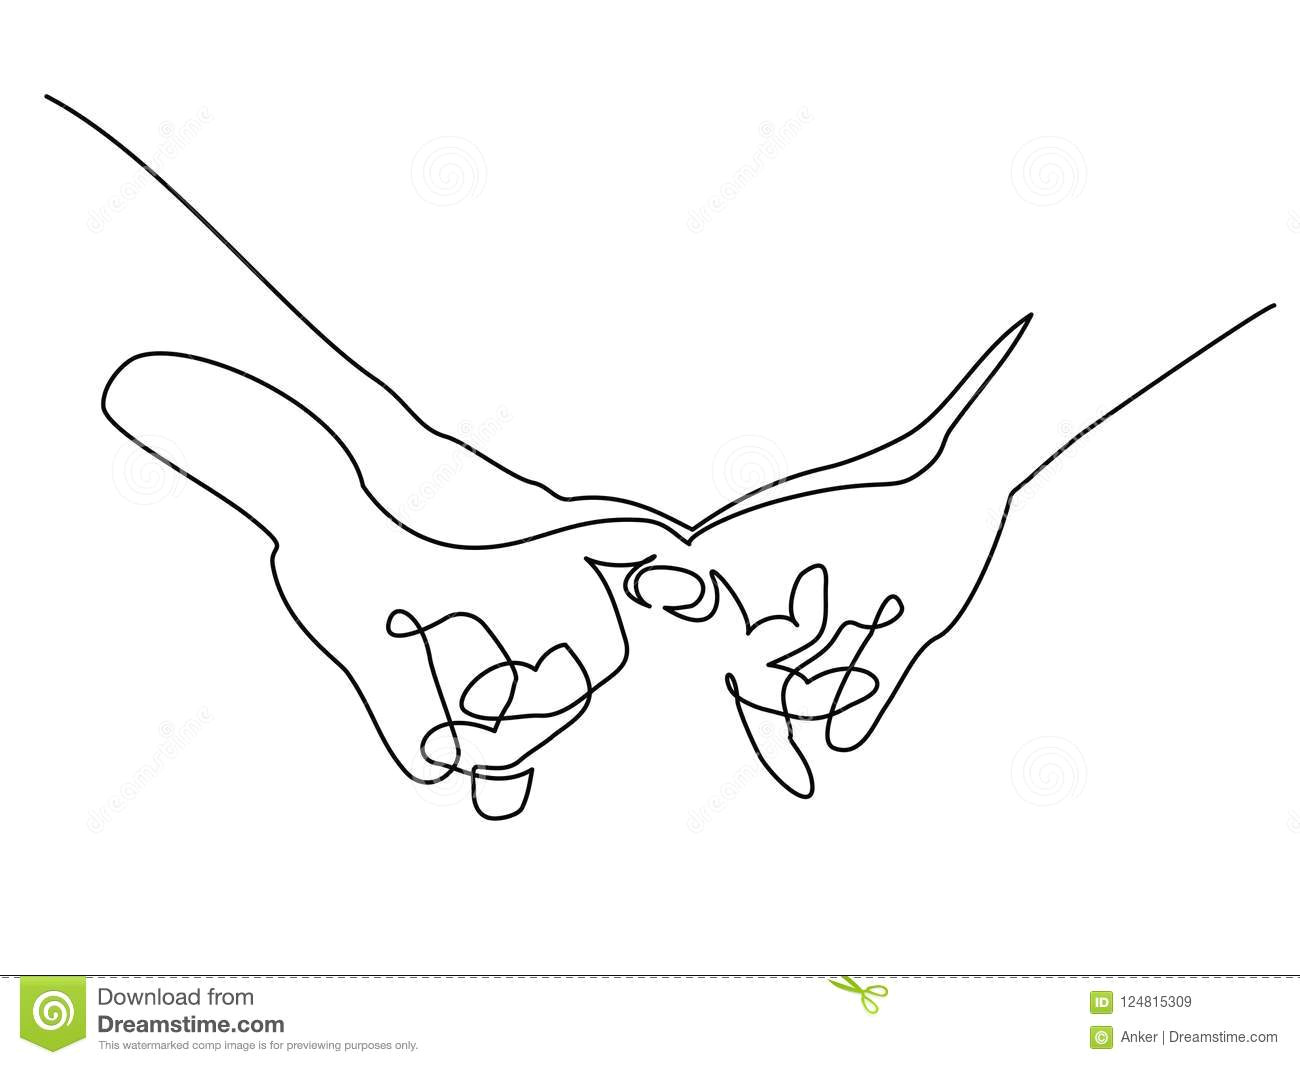 Drawings Of Ladies Hands Hands Woman and Man Holding together with Fingers Stock Vector